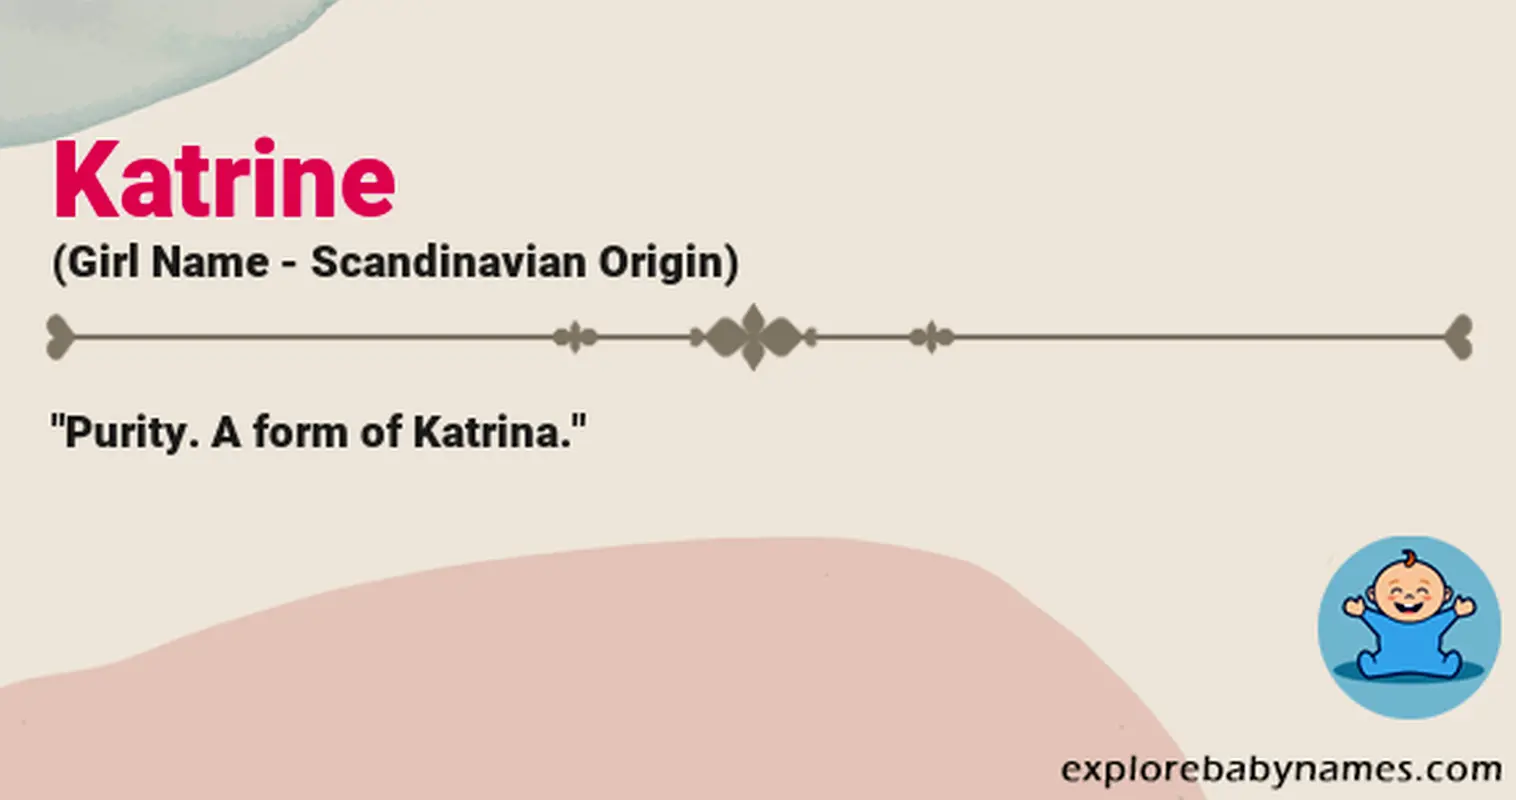 Meaning of Katrine